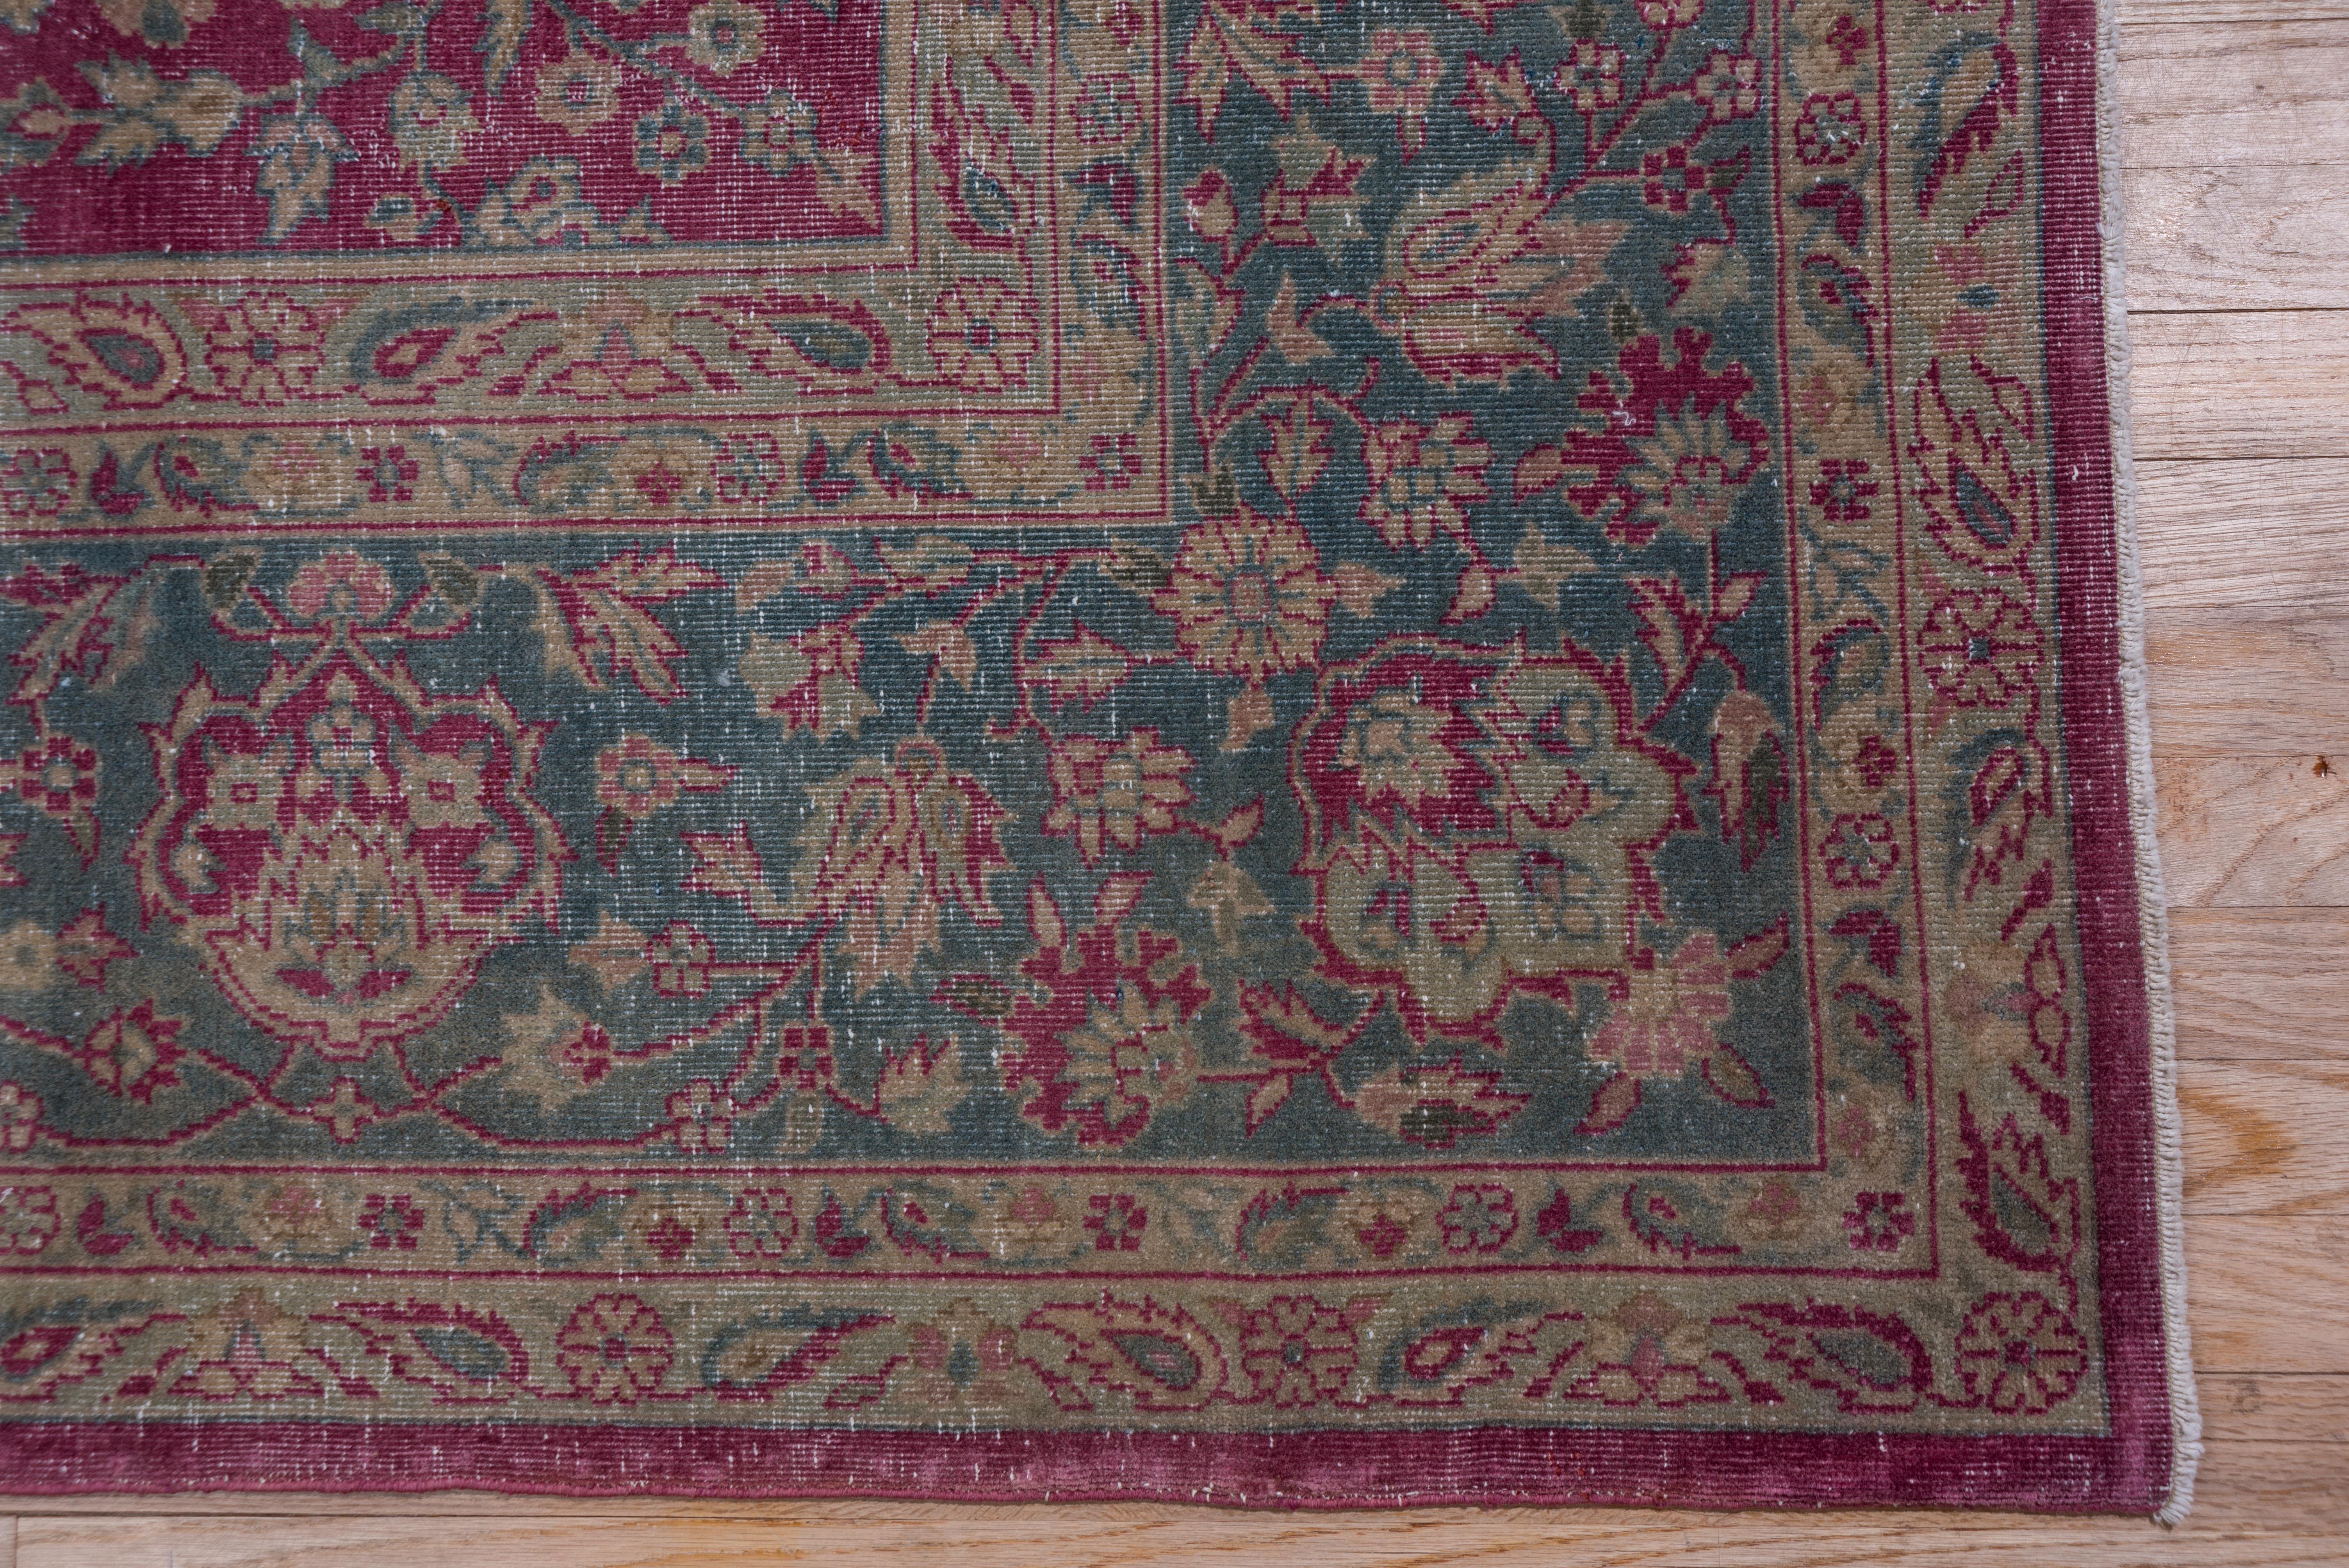 Wool Antique Turkish Sivas Rug, Raspberry Red Field, Teal Borders, Circa 1930s For Sale